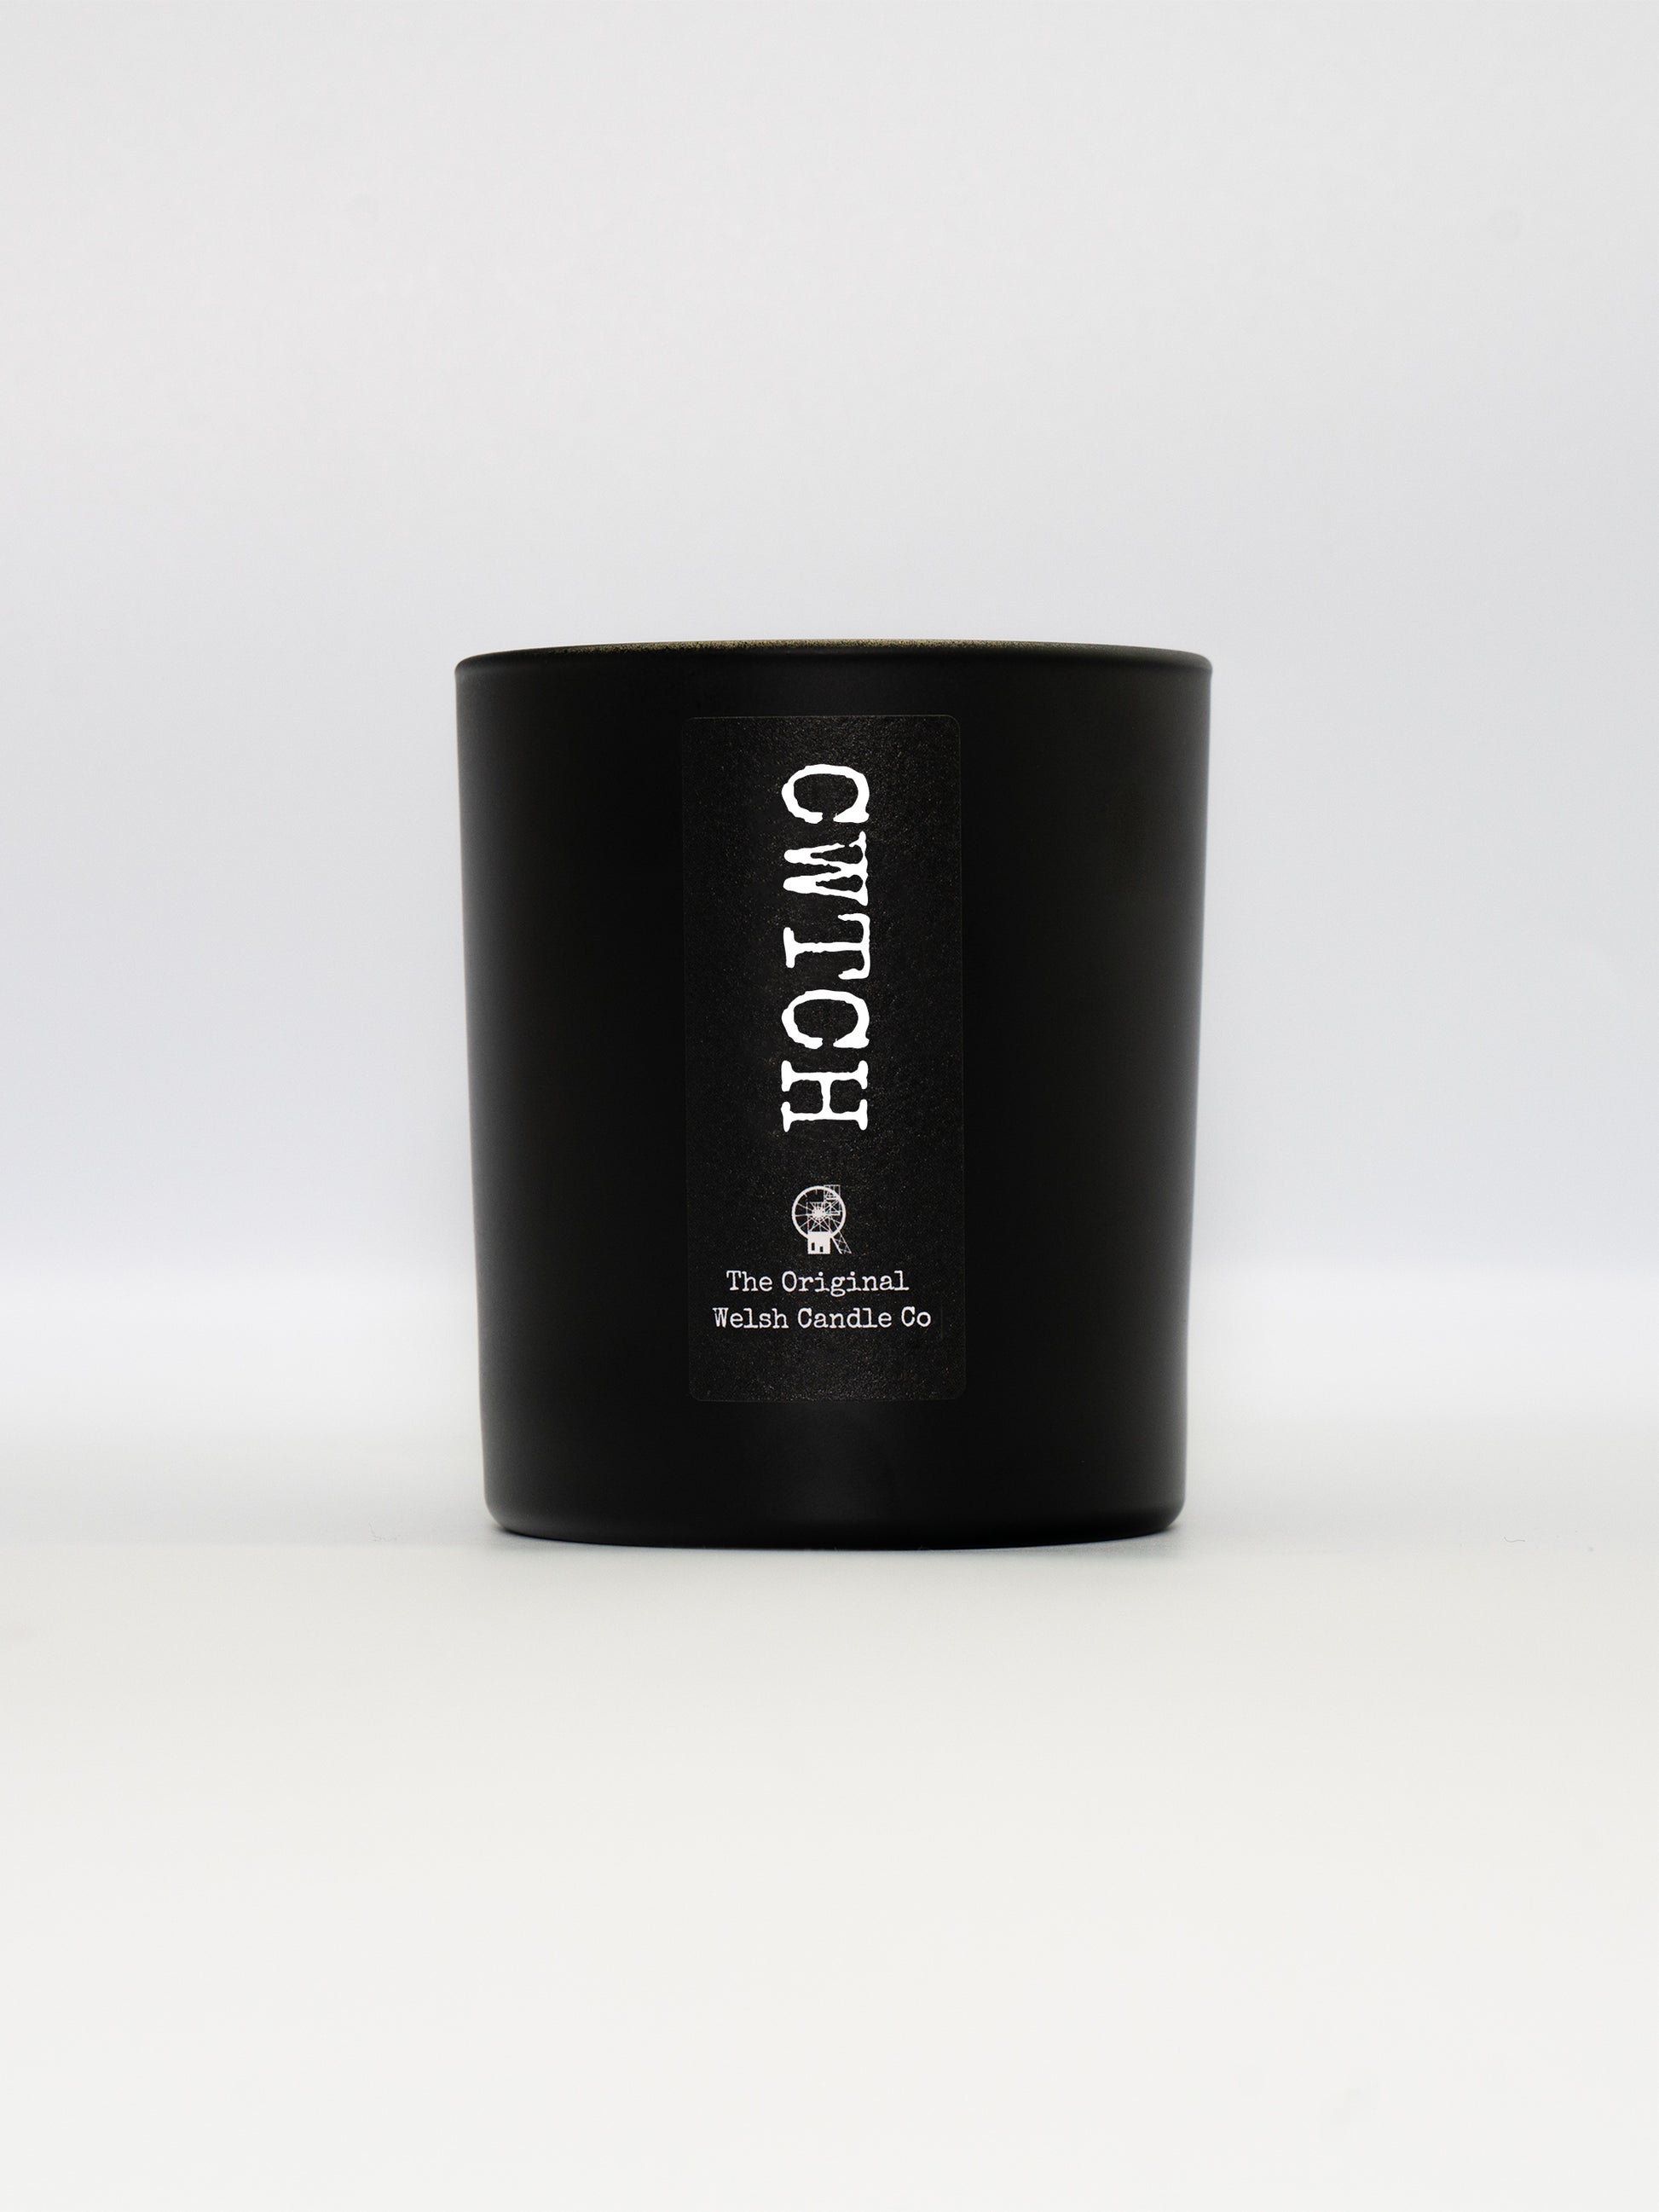 A luxury matt black glass jar, containing a soy scnted candle fragranced with rose and oud